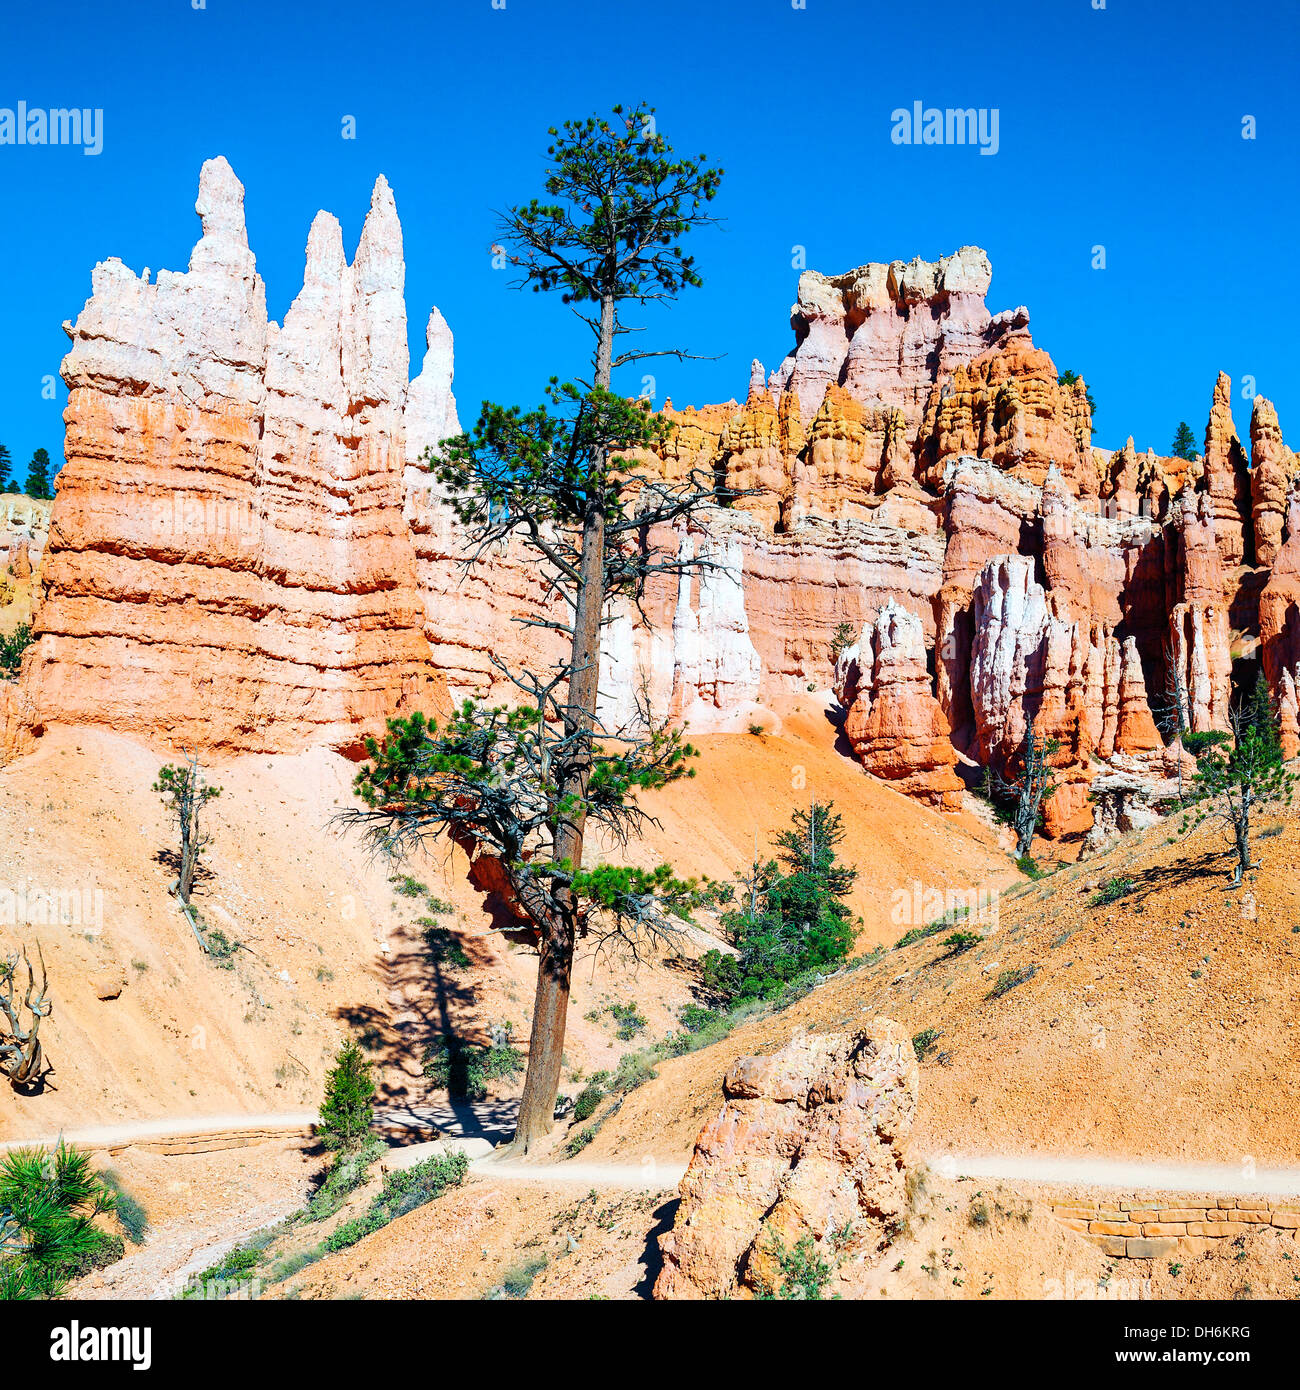 Hoodoo spectaculaire rock tours de Bryce Canyon, Utah, USA Banque D'Images